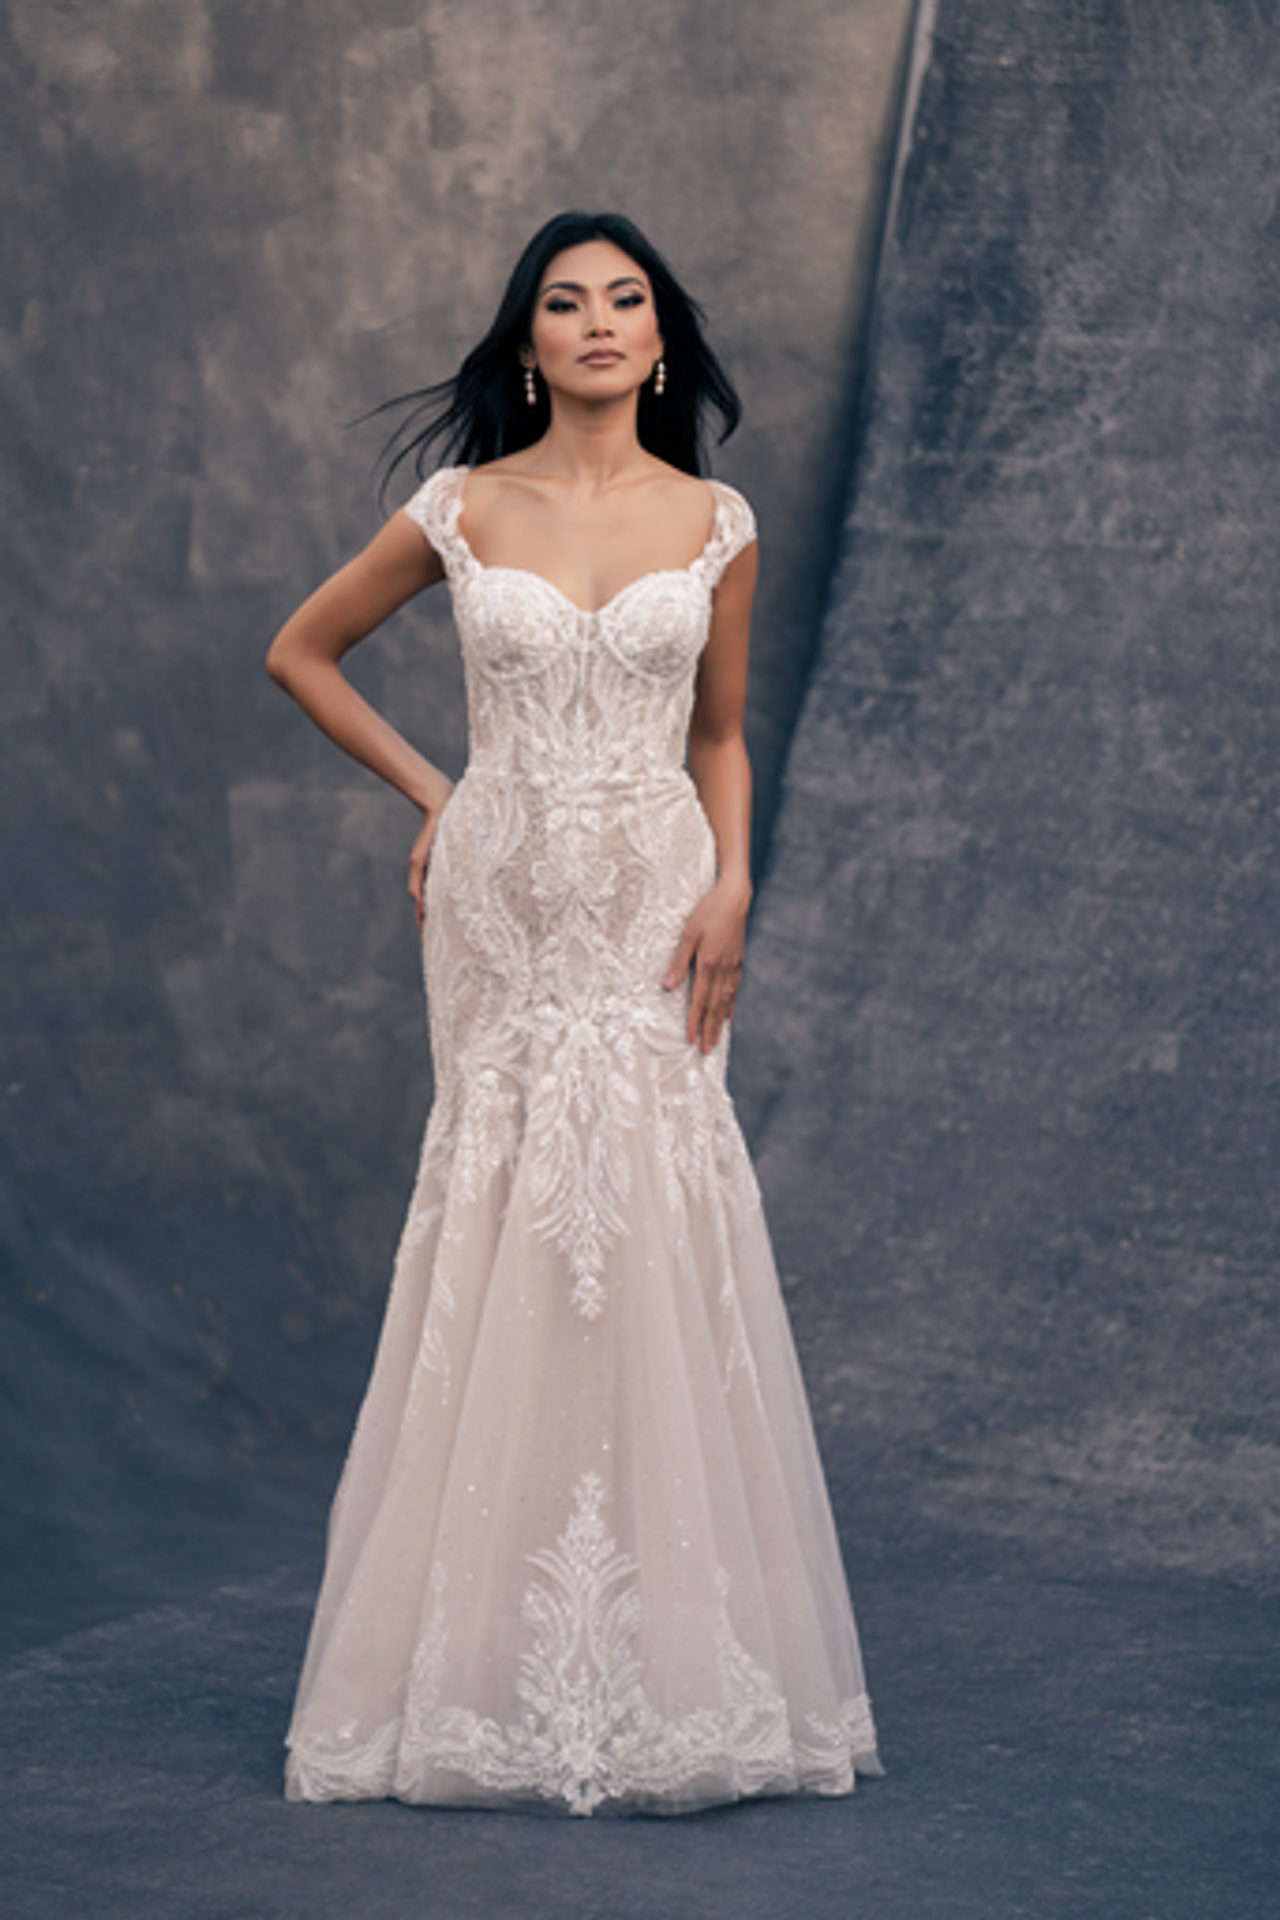 Romanic And Sexy Exposed Boning Fit And Flare Gown by Allure Bridals - Image 1